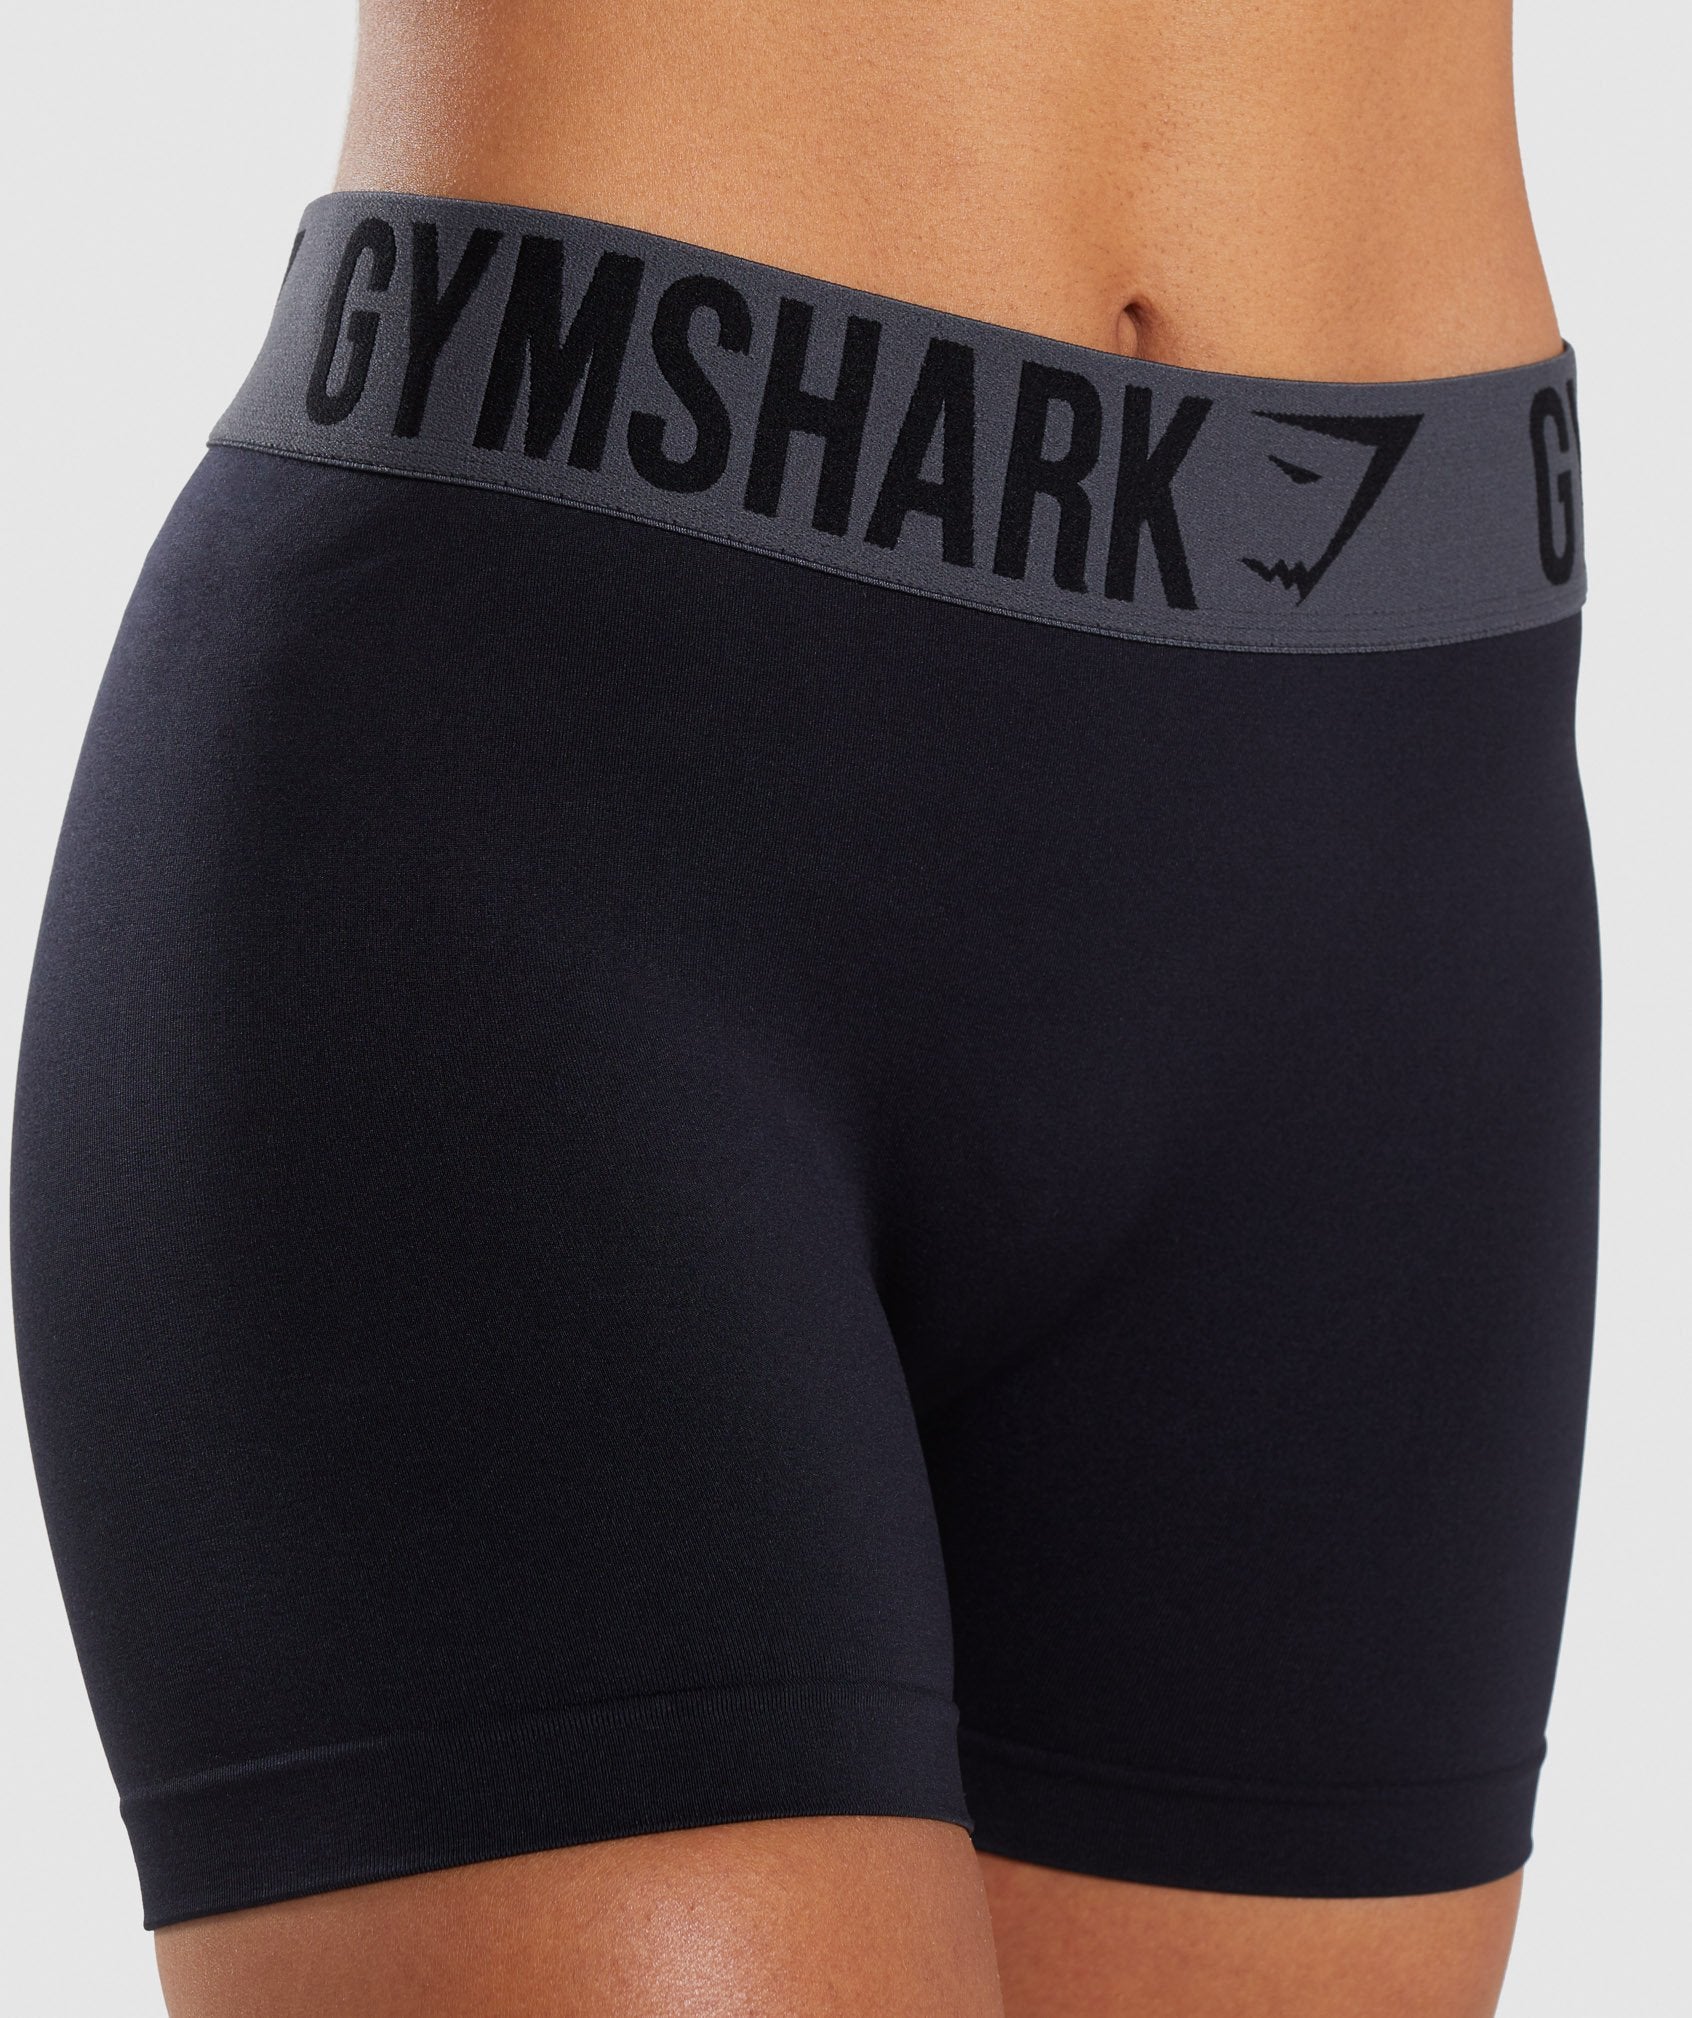 Fit Seamless Shorts in Black - view 5